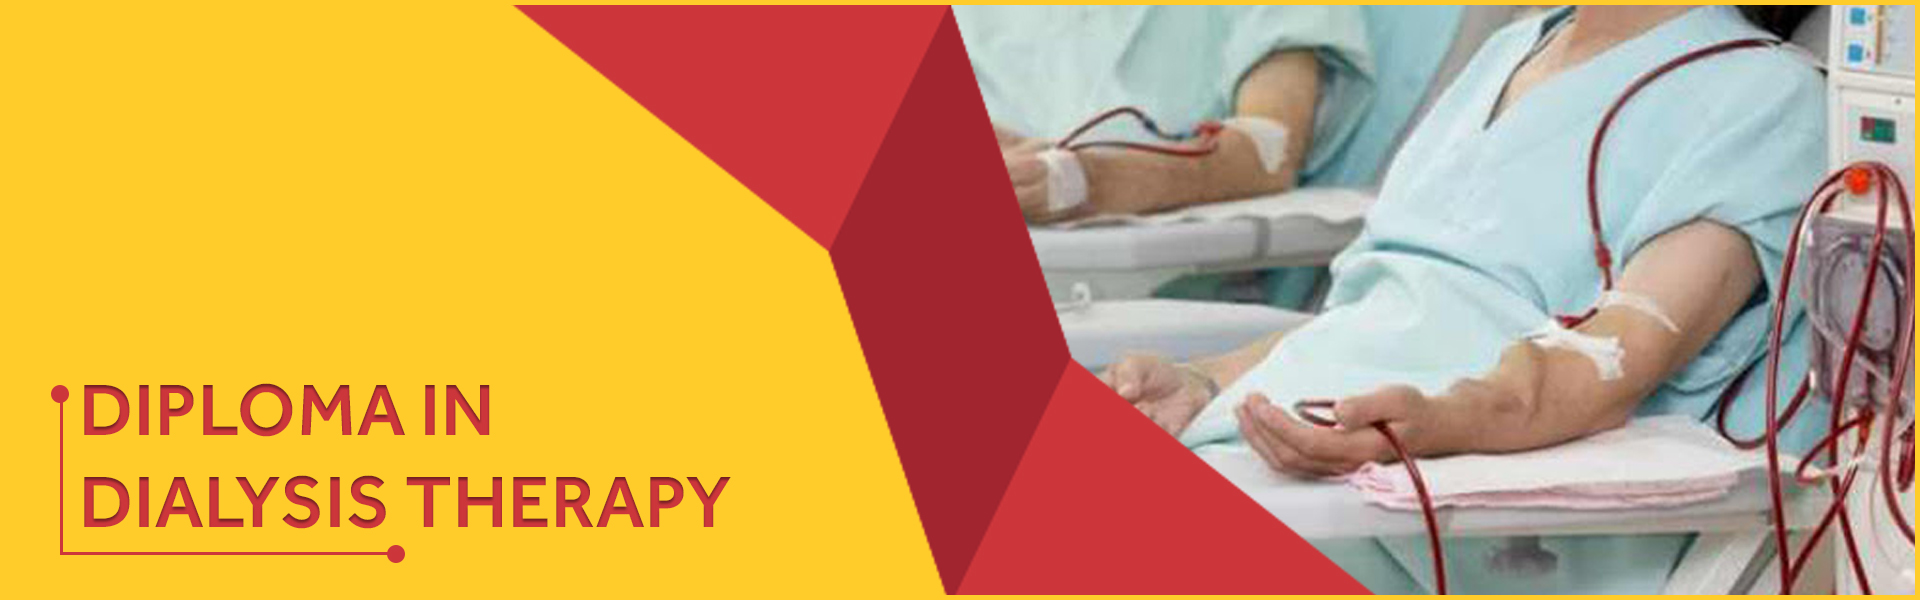 Diploma in Dialysis Therapy Course/College in Haryana, India